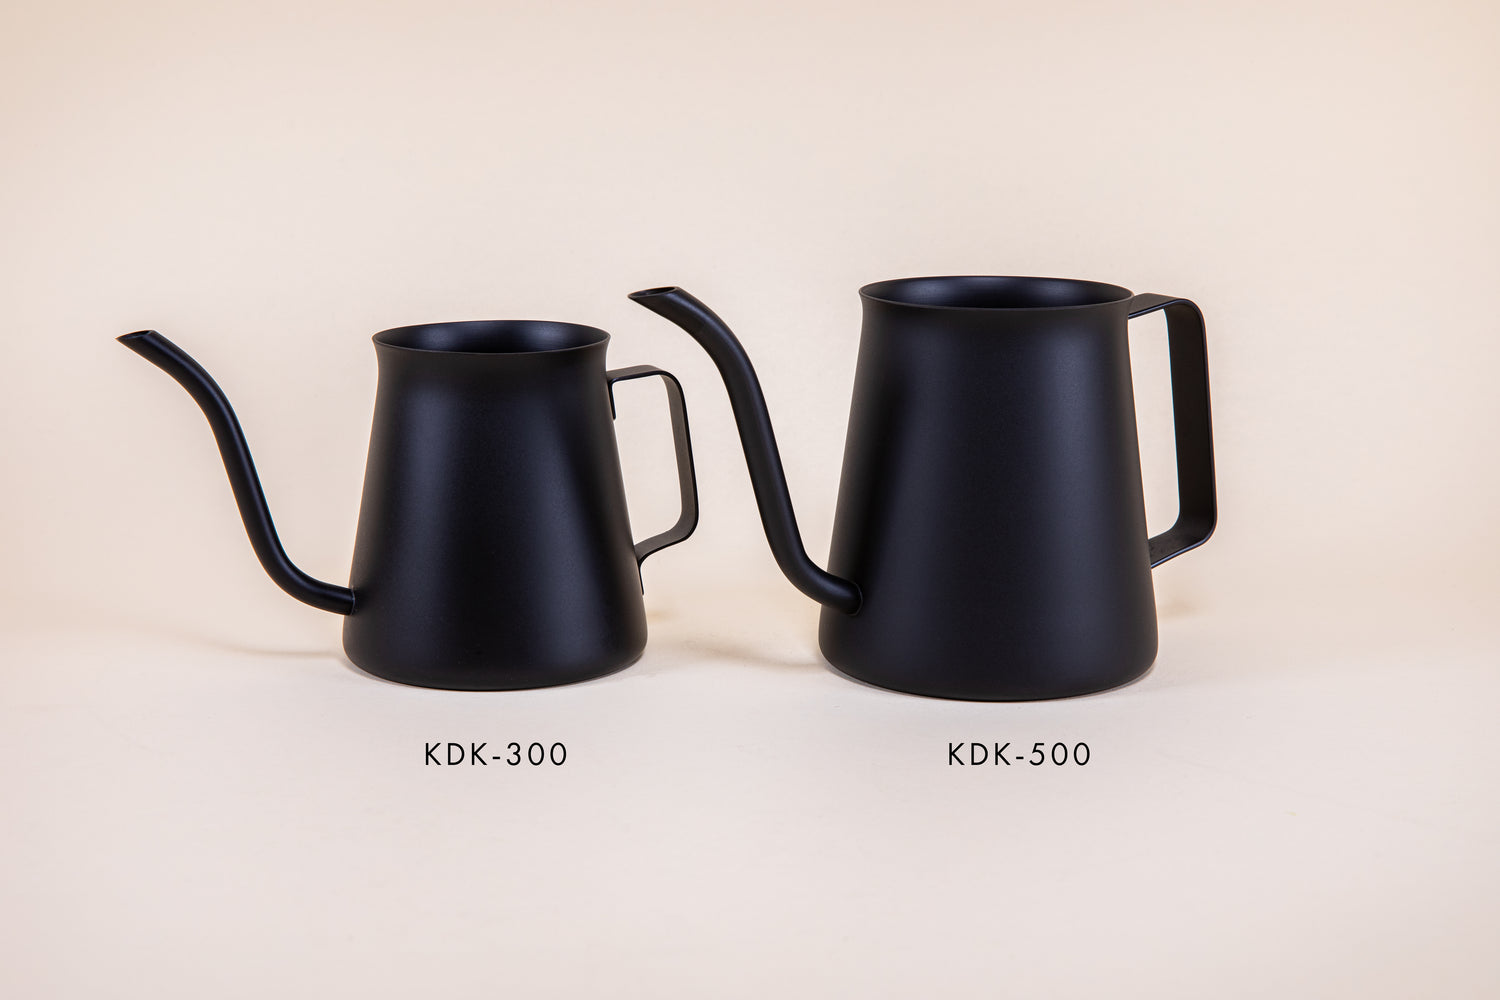 Small all black metal kettle with flared top, gooseneck spout, and handle next to a bigger all black metal kettle with flared top, gooseneck spout, and handle on a light background.